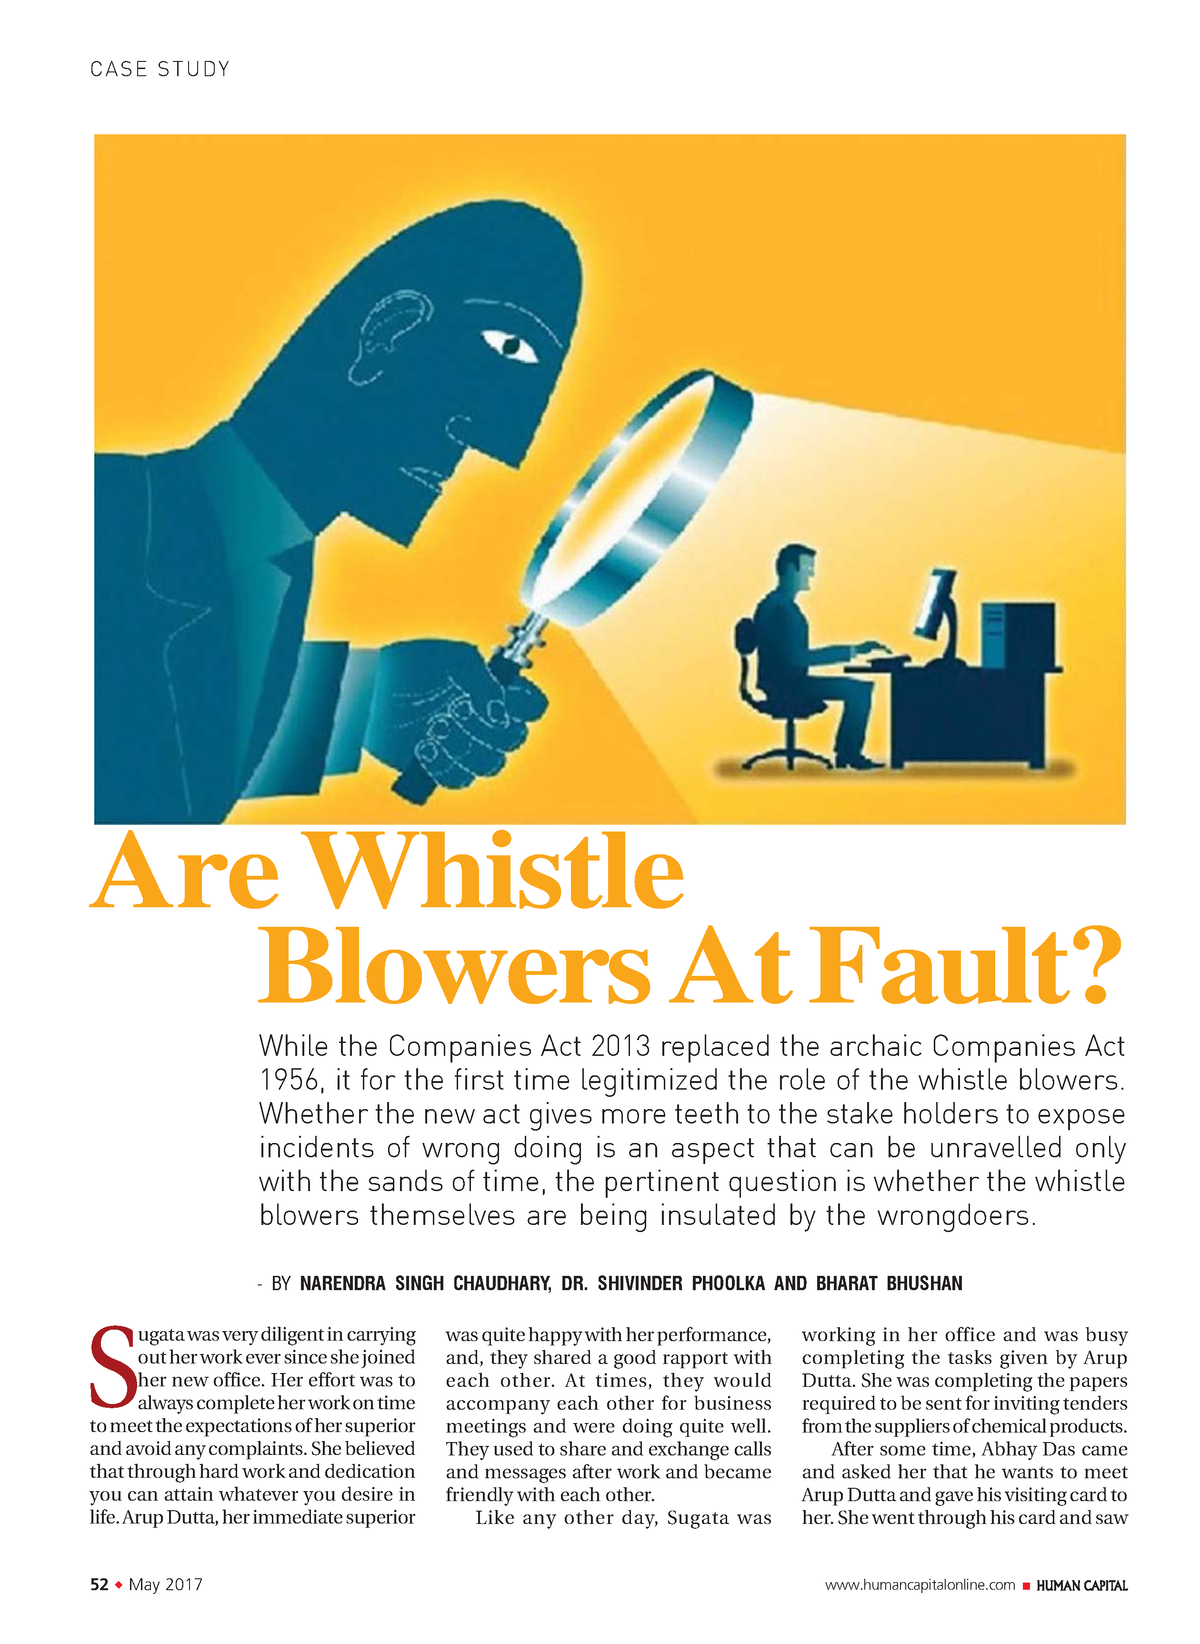 case study on whistleblowing in india